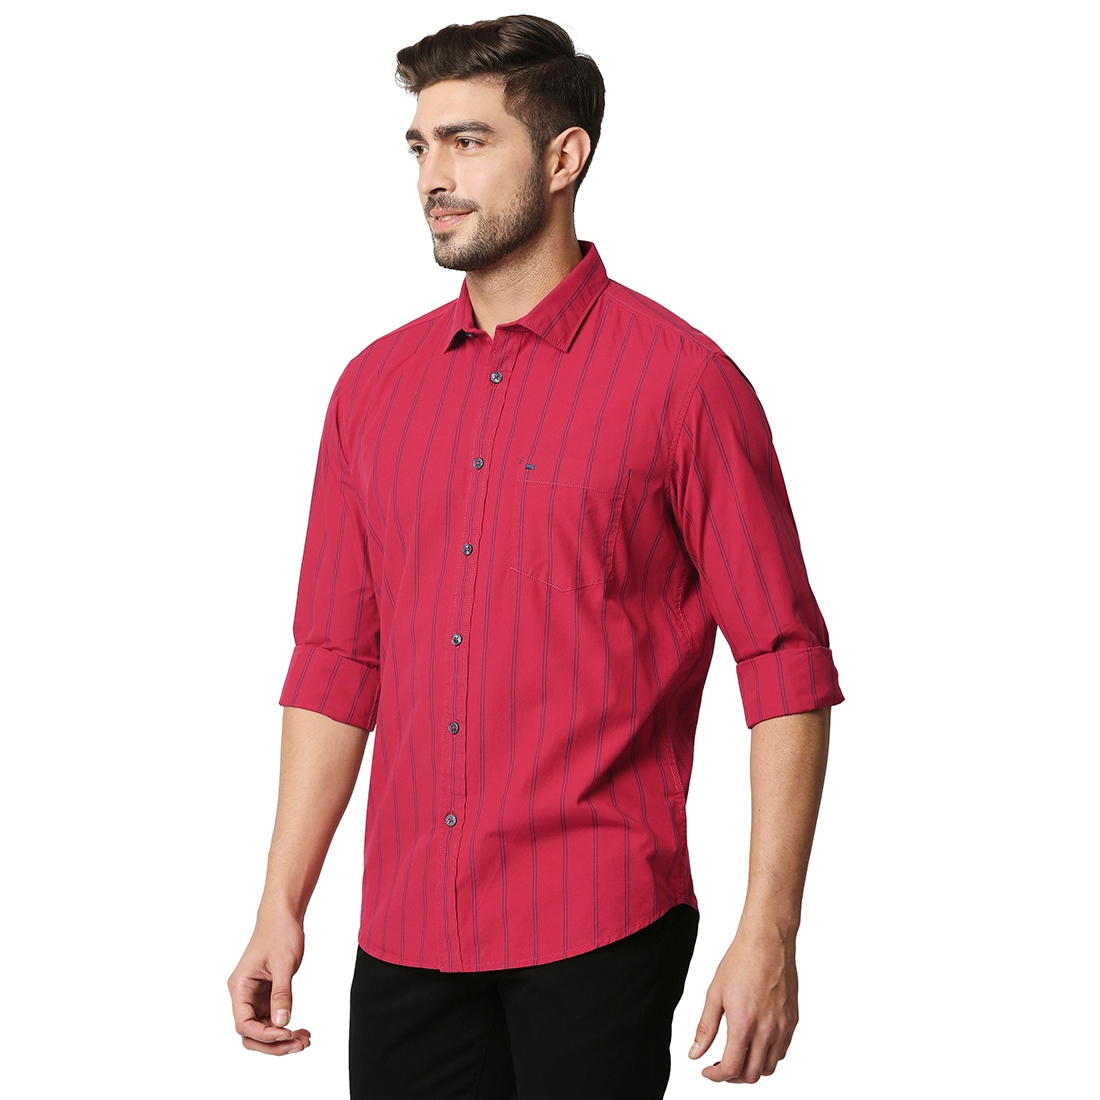 Basics | Men's Red Cotton Striped Casual Shirt 2